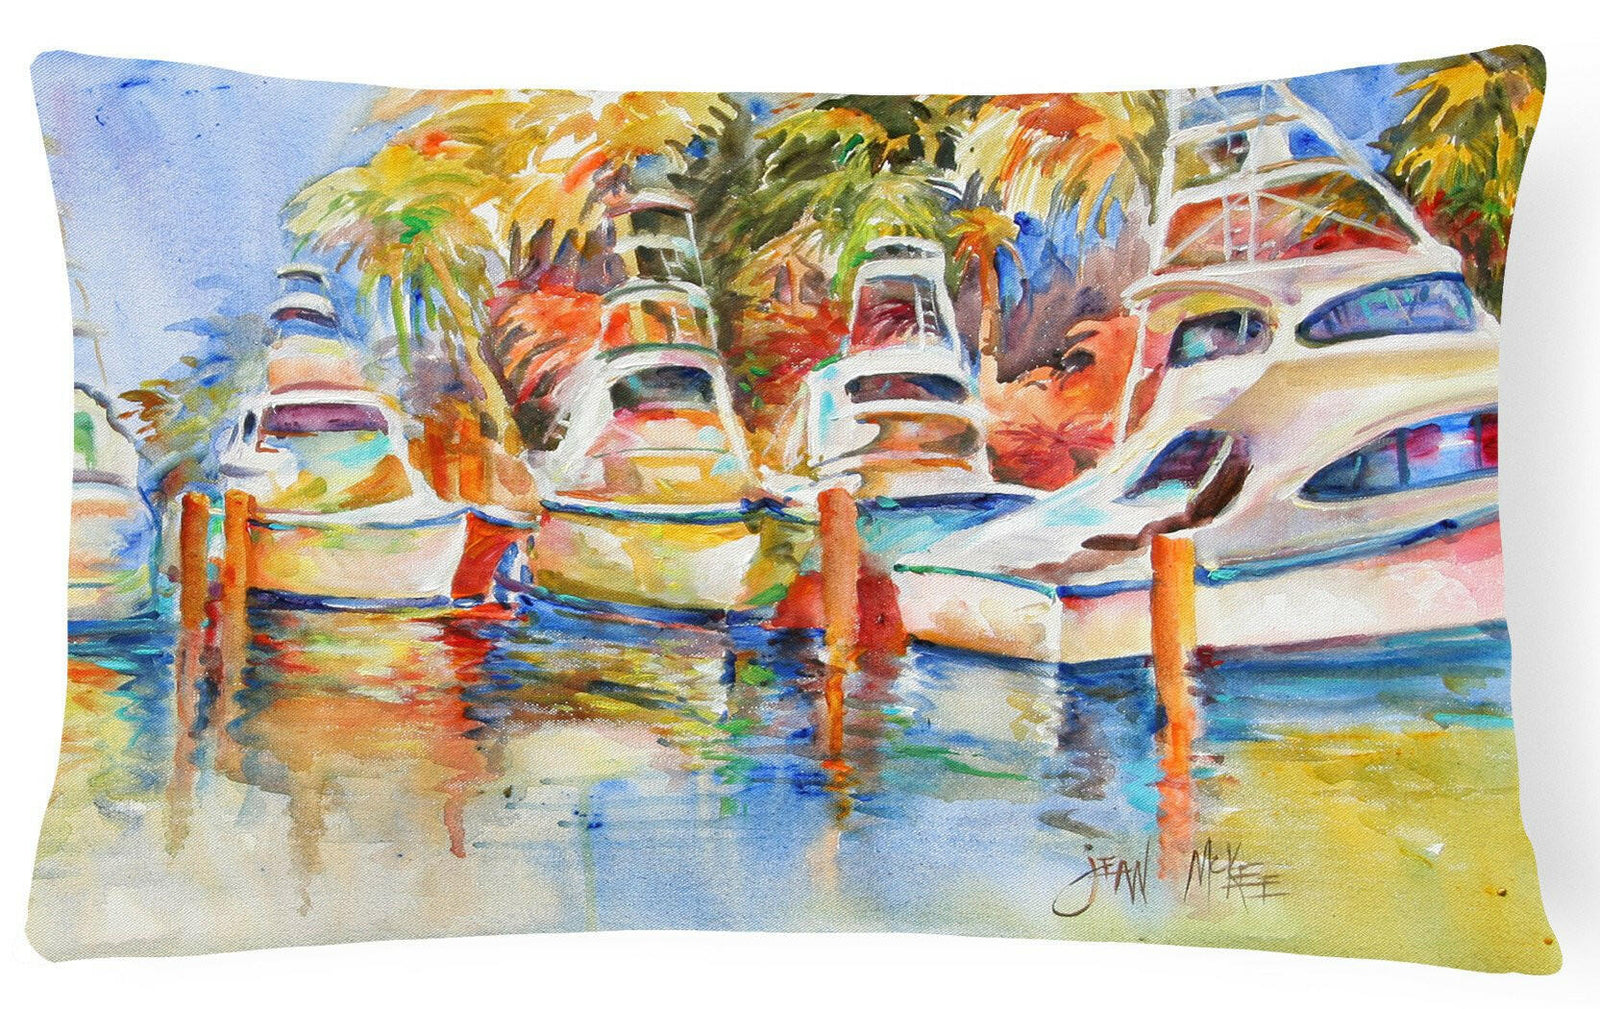 Deep Sea Fishing Boats at the Dock Canvas Fabric Decorative Pillow JMK1052PW1216 by Caroline's Treasures